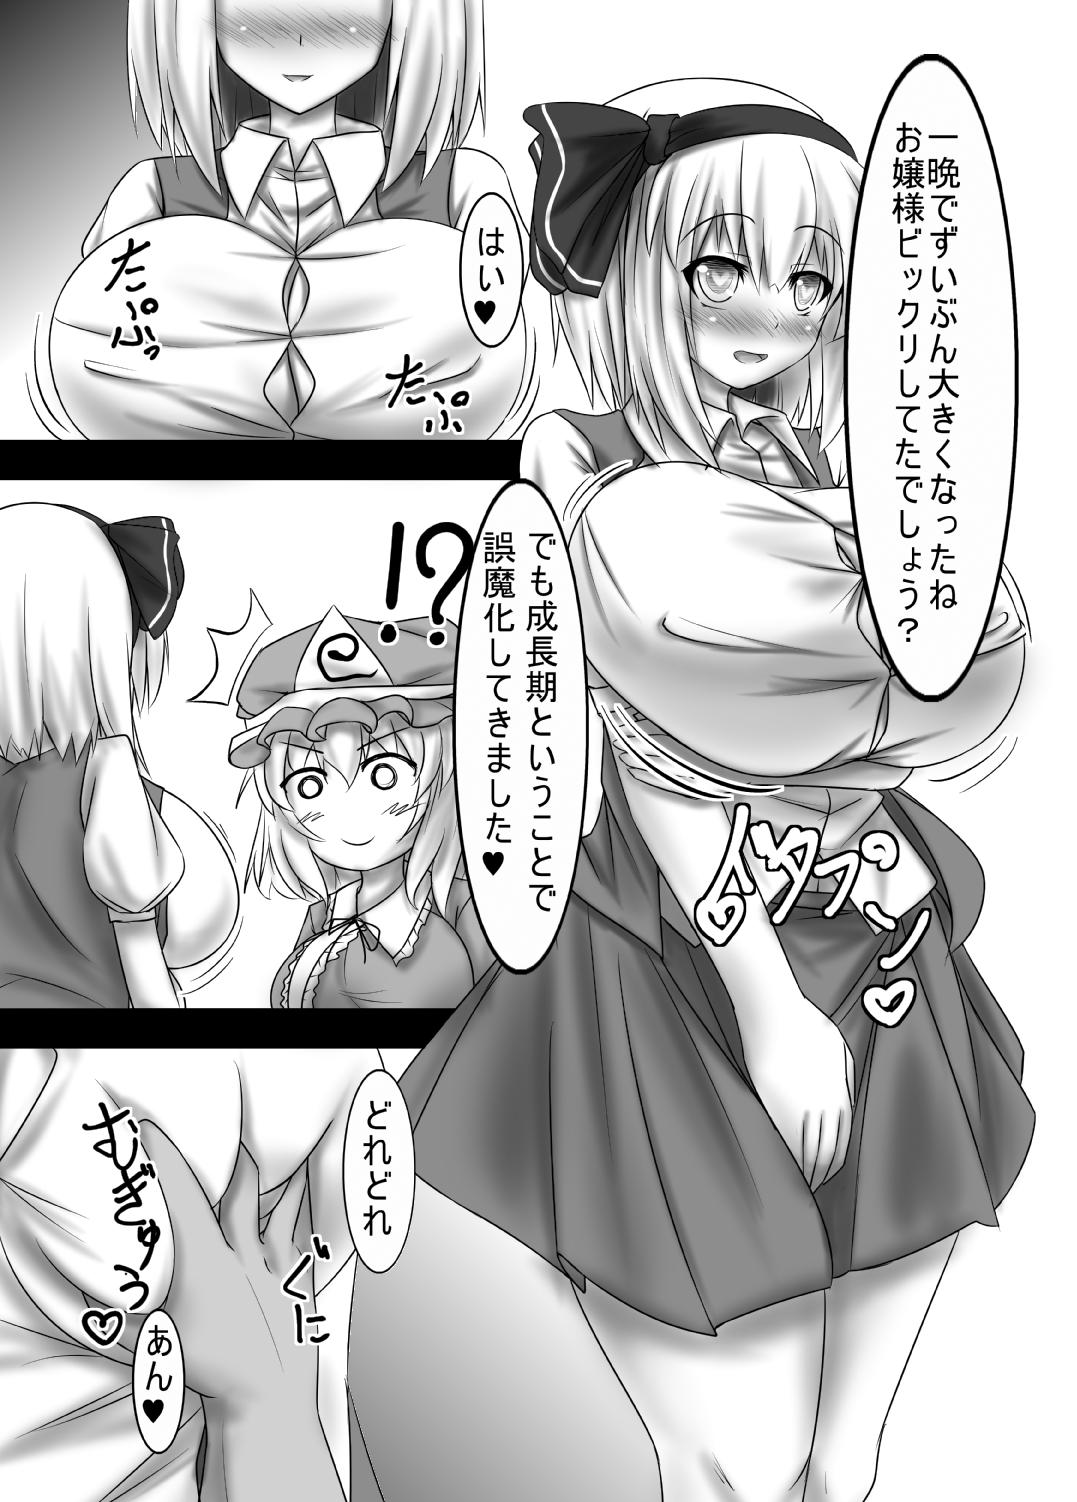 Curious 催みょん - Touhou project Tamil - Page 6